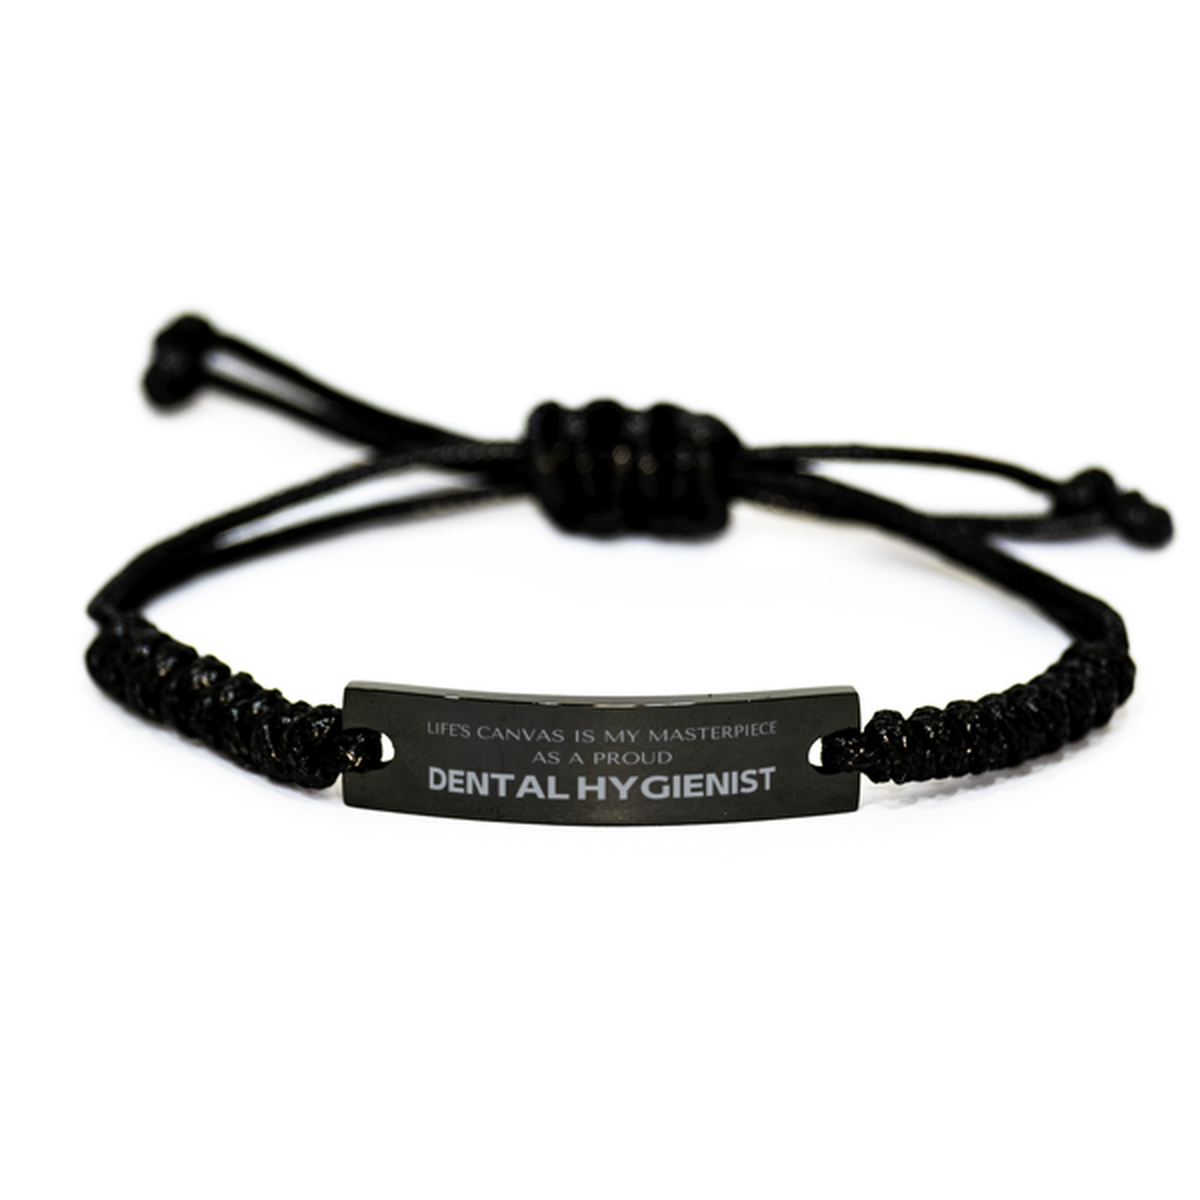 Proud Dental Hygienist Gifts, Life's canvas is my masterpiece, Epic Birthday Christmas Unique Black Rope Bracelet For Dental Hygienist, Coworkers, Men, Women, Friends